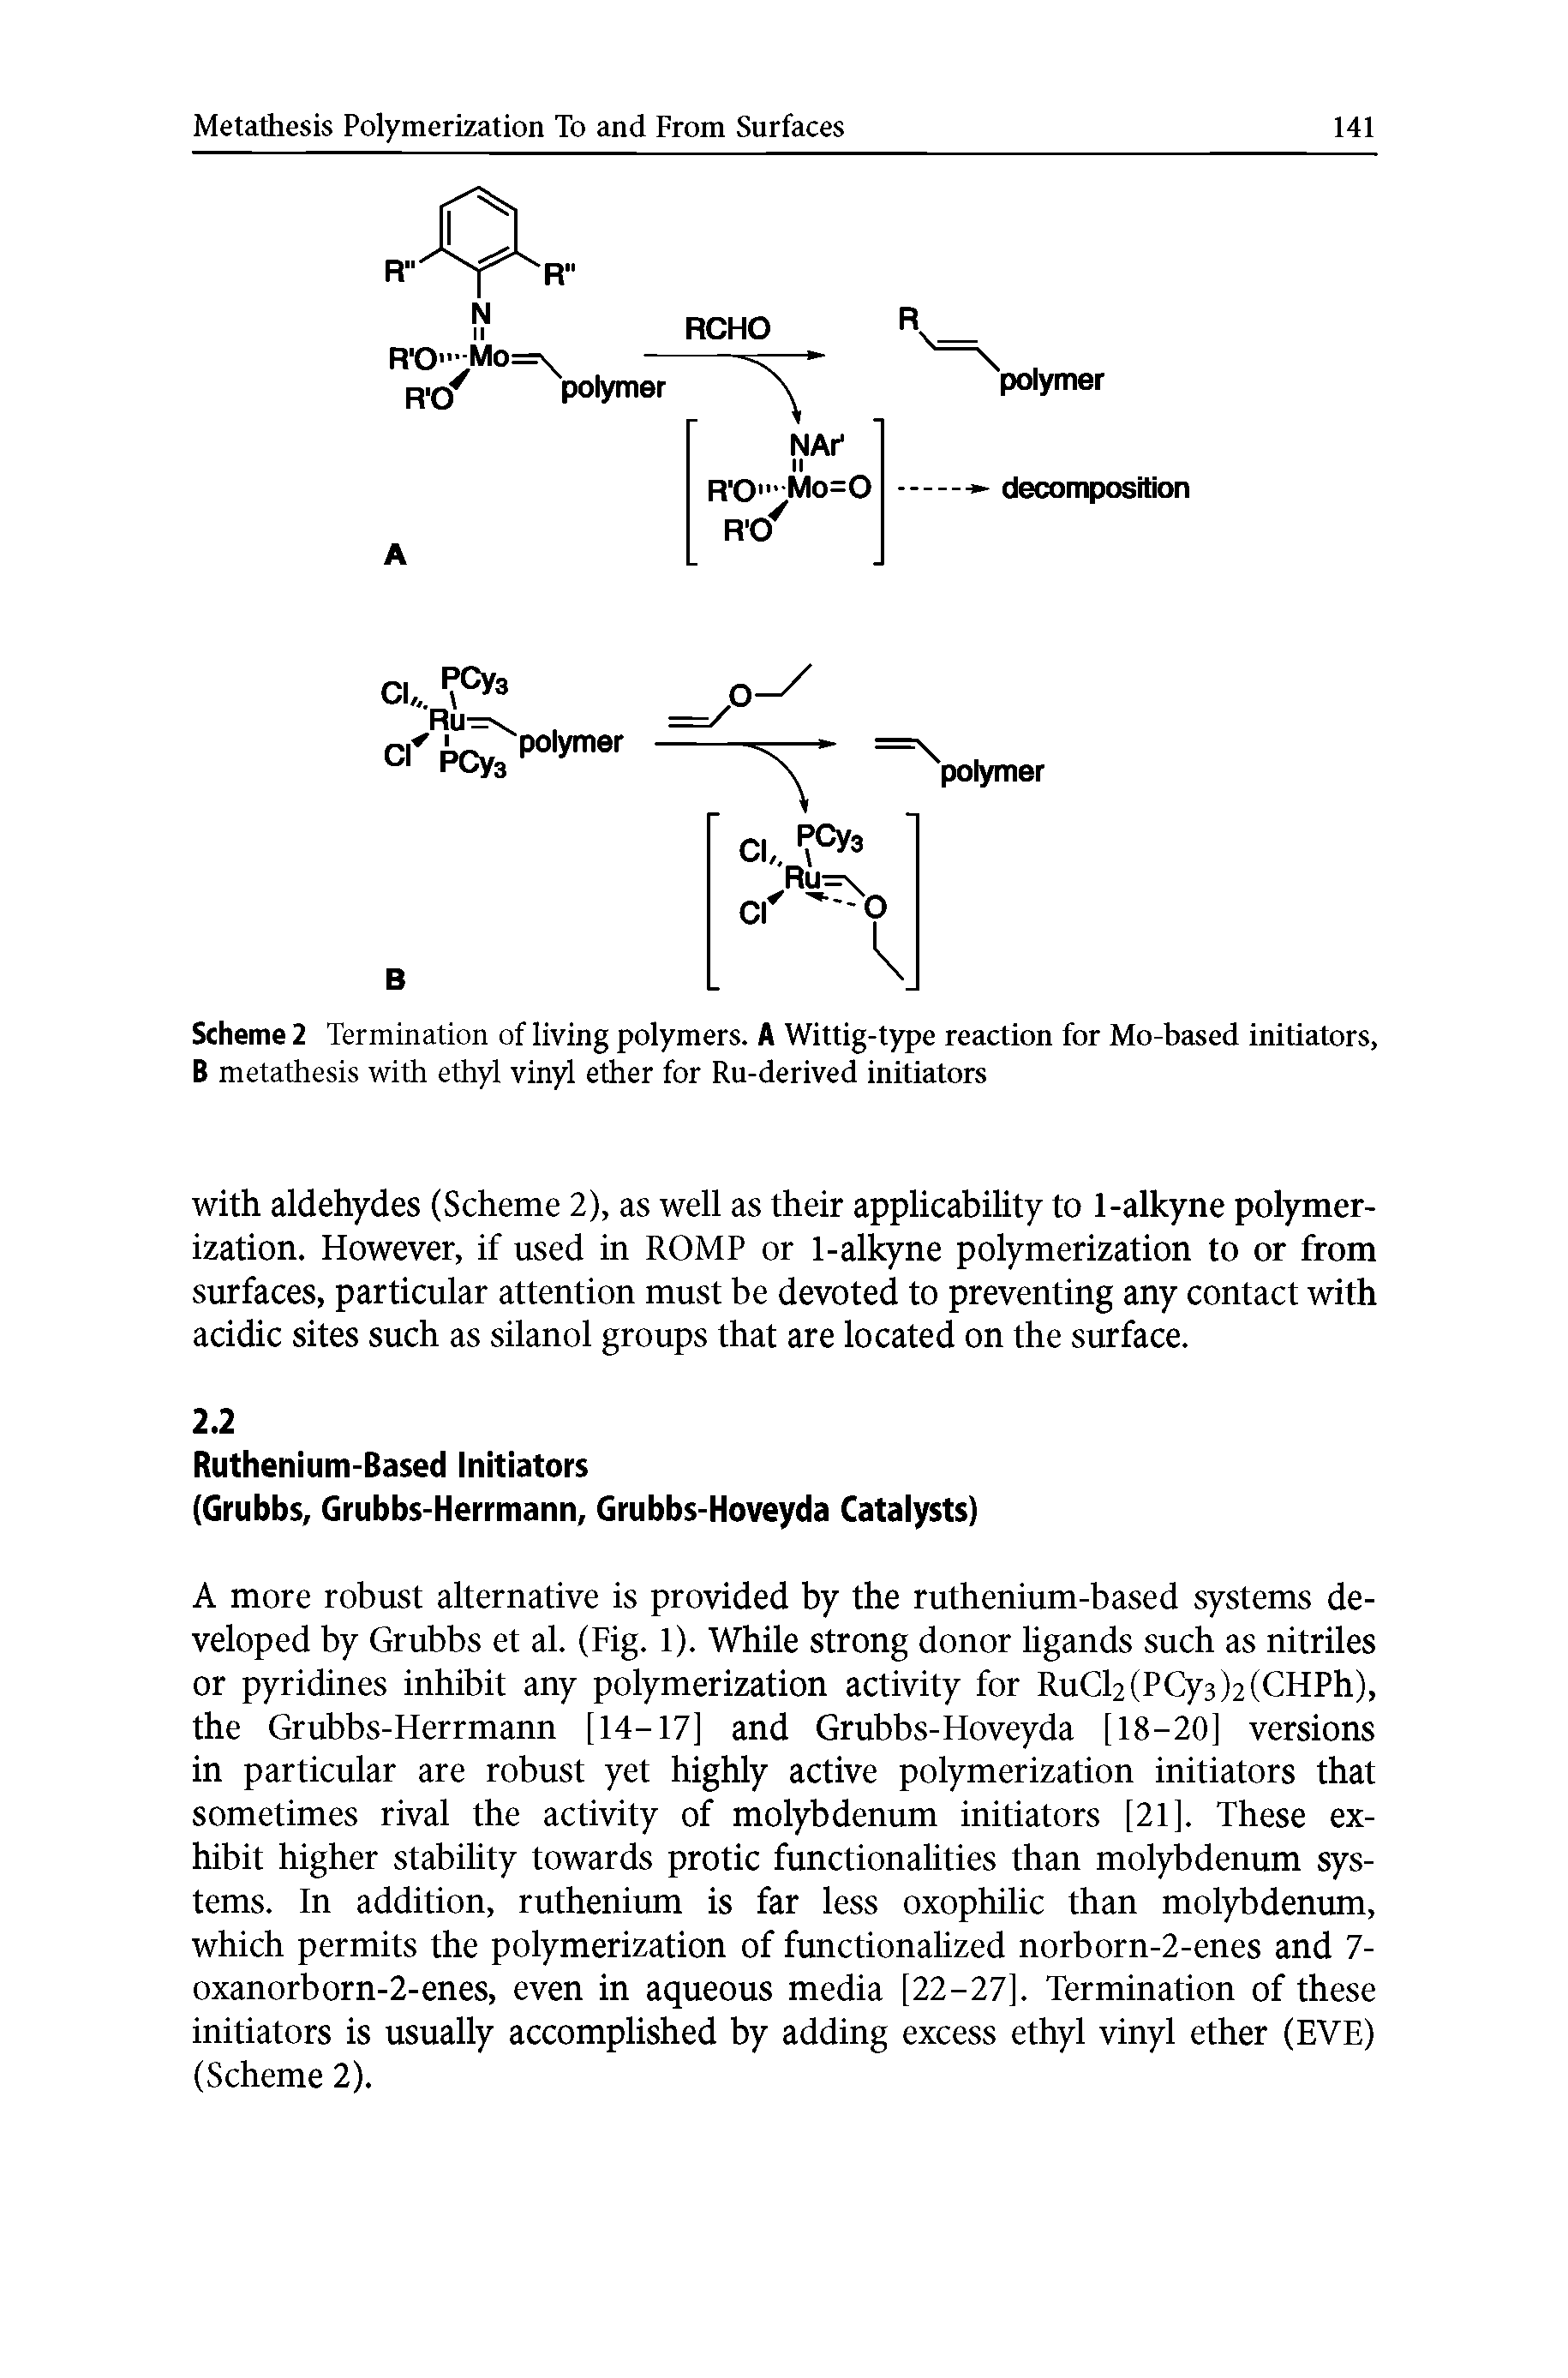 Scheme 2 Termination of living polymers. A Wittig-type reaction for Mo-based initiators, B metathesis with ethyl vinyl ether for Ru-derived initiators...